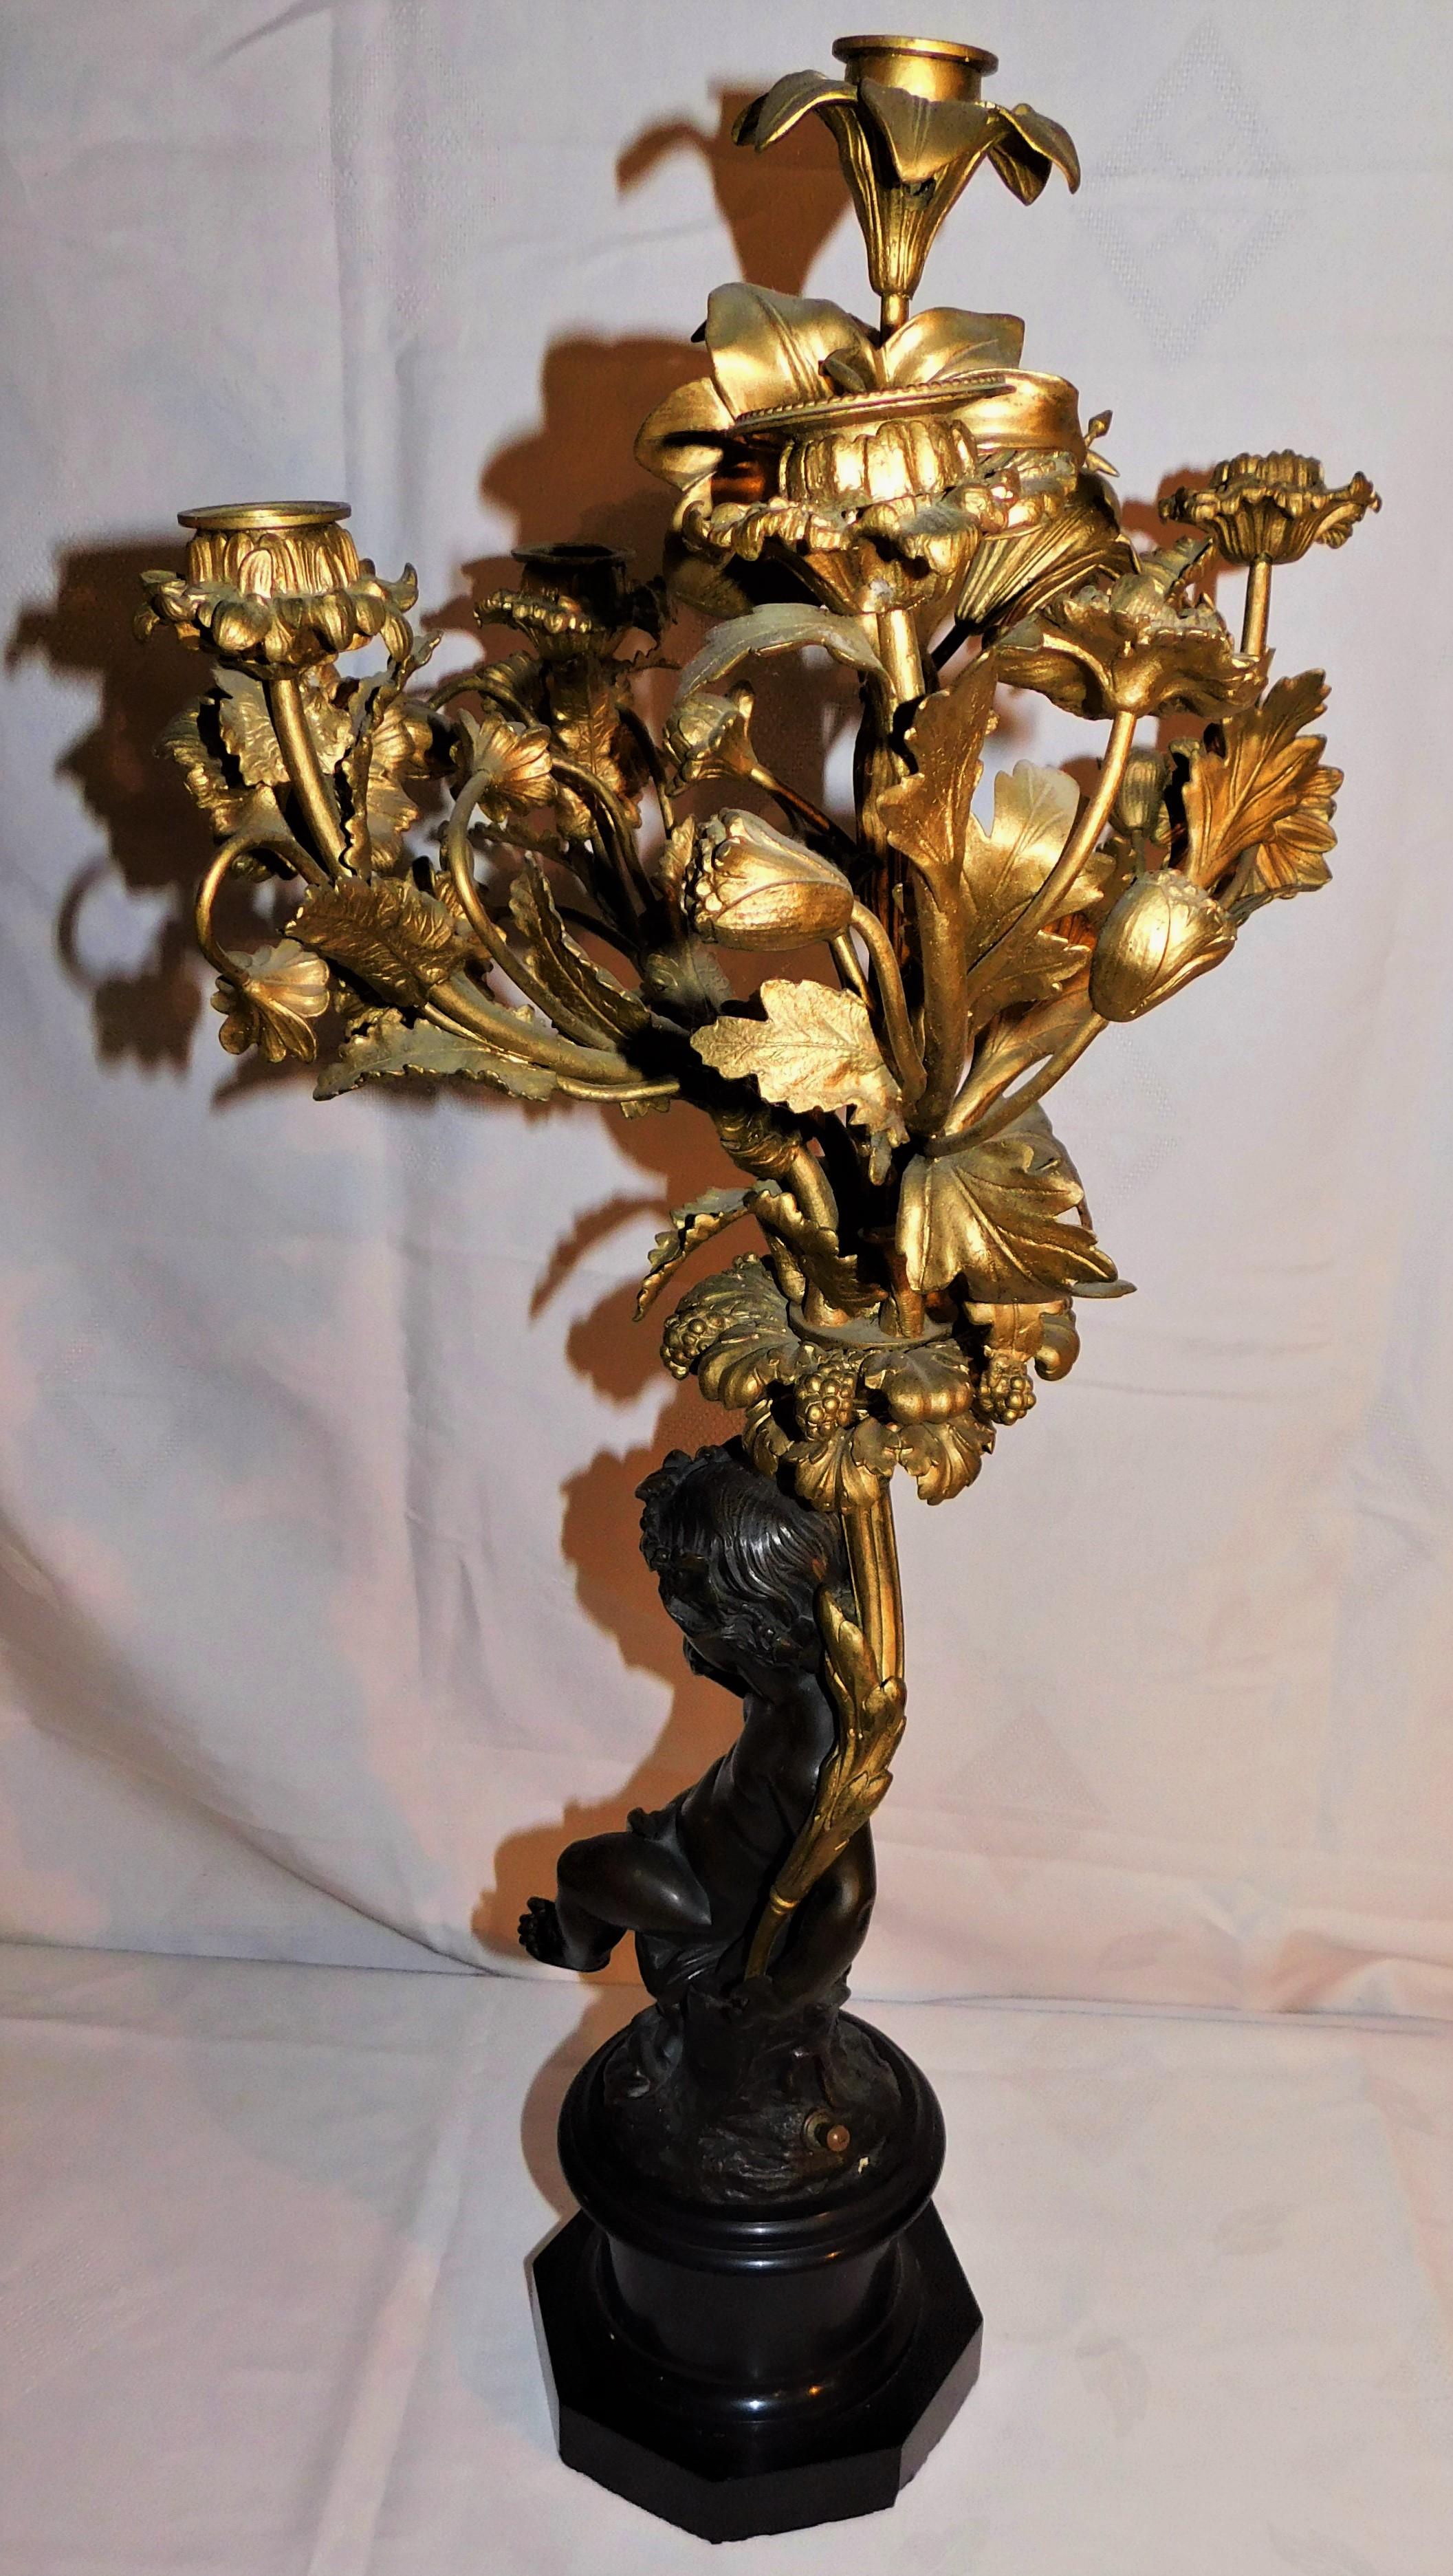 Pair of 19th Century French Gold Gilded Bronze Putti Cherubs Candelabras For Sale 2